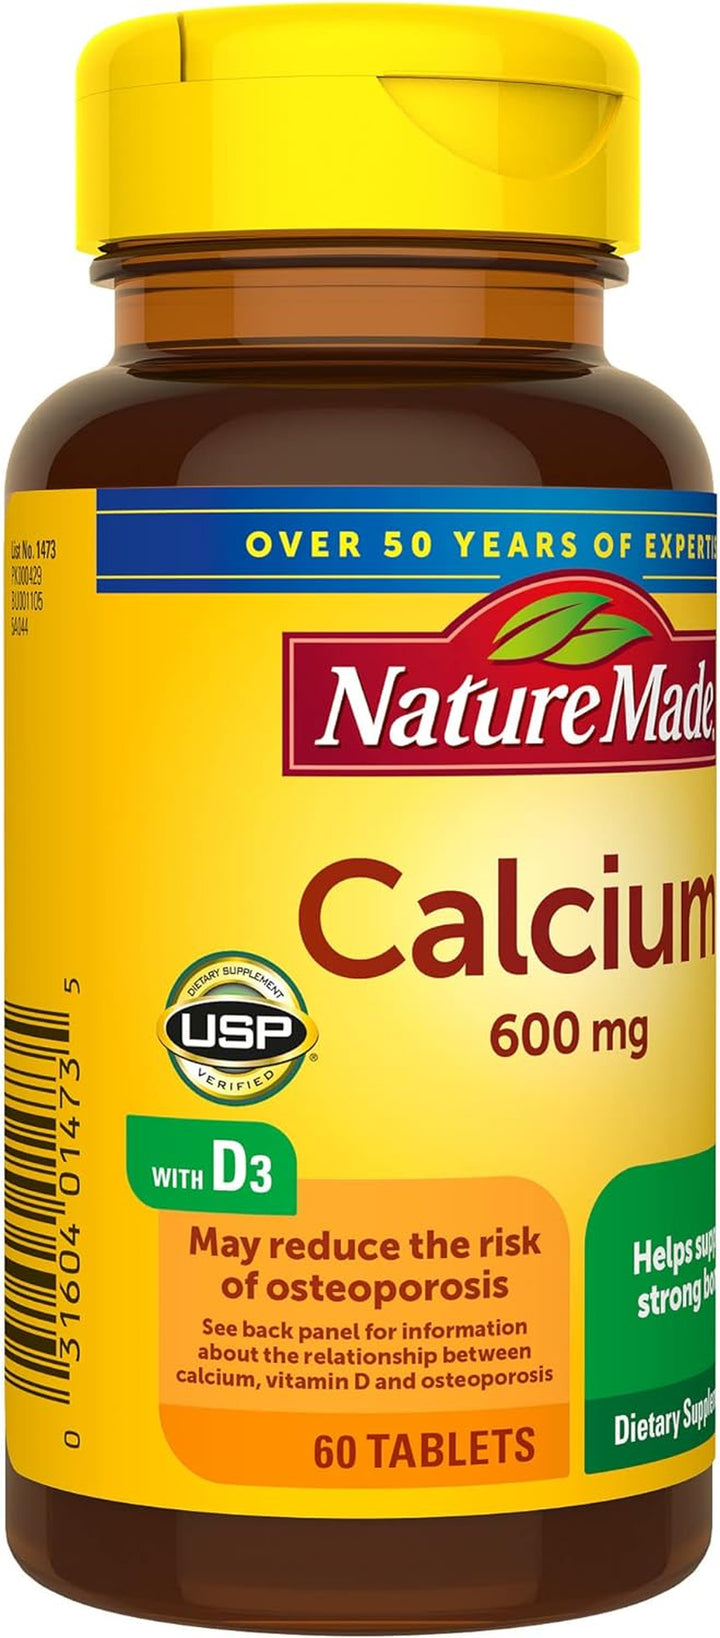 Nature Made Calcium 600 Mg with Vitamin D - 120 Tablets by Nature Made